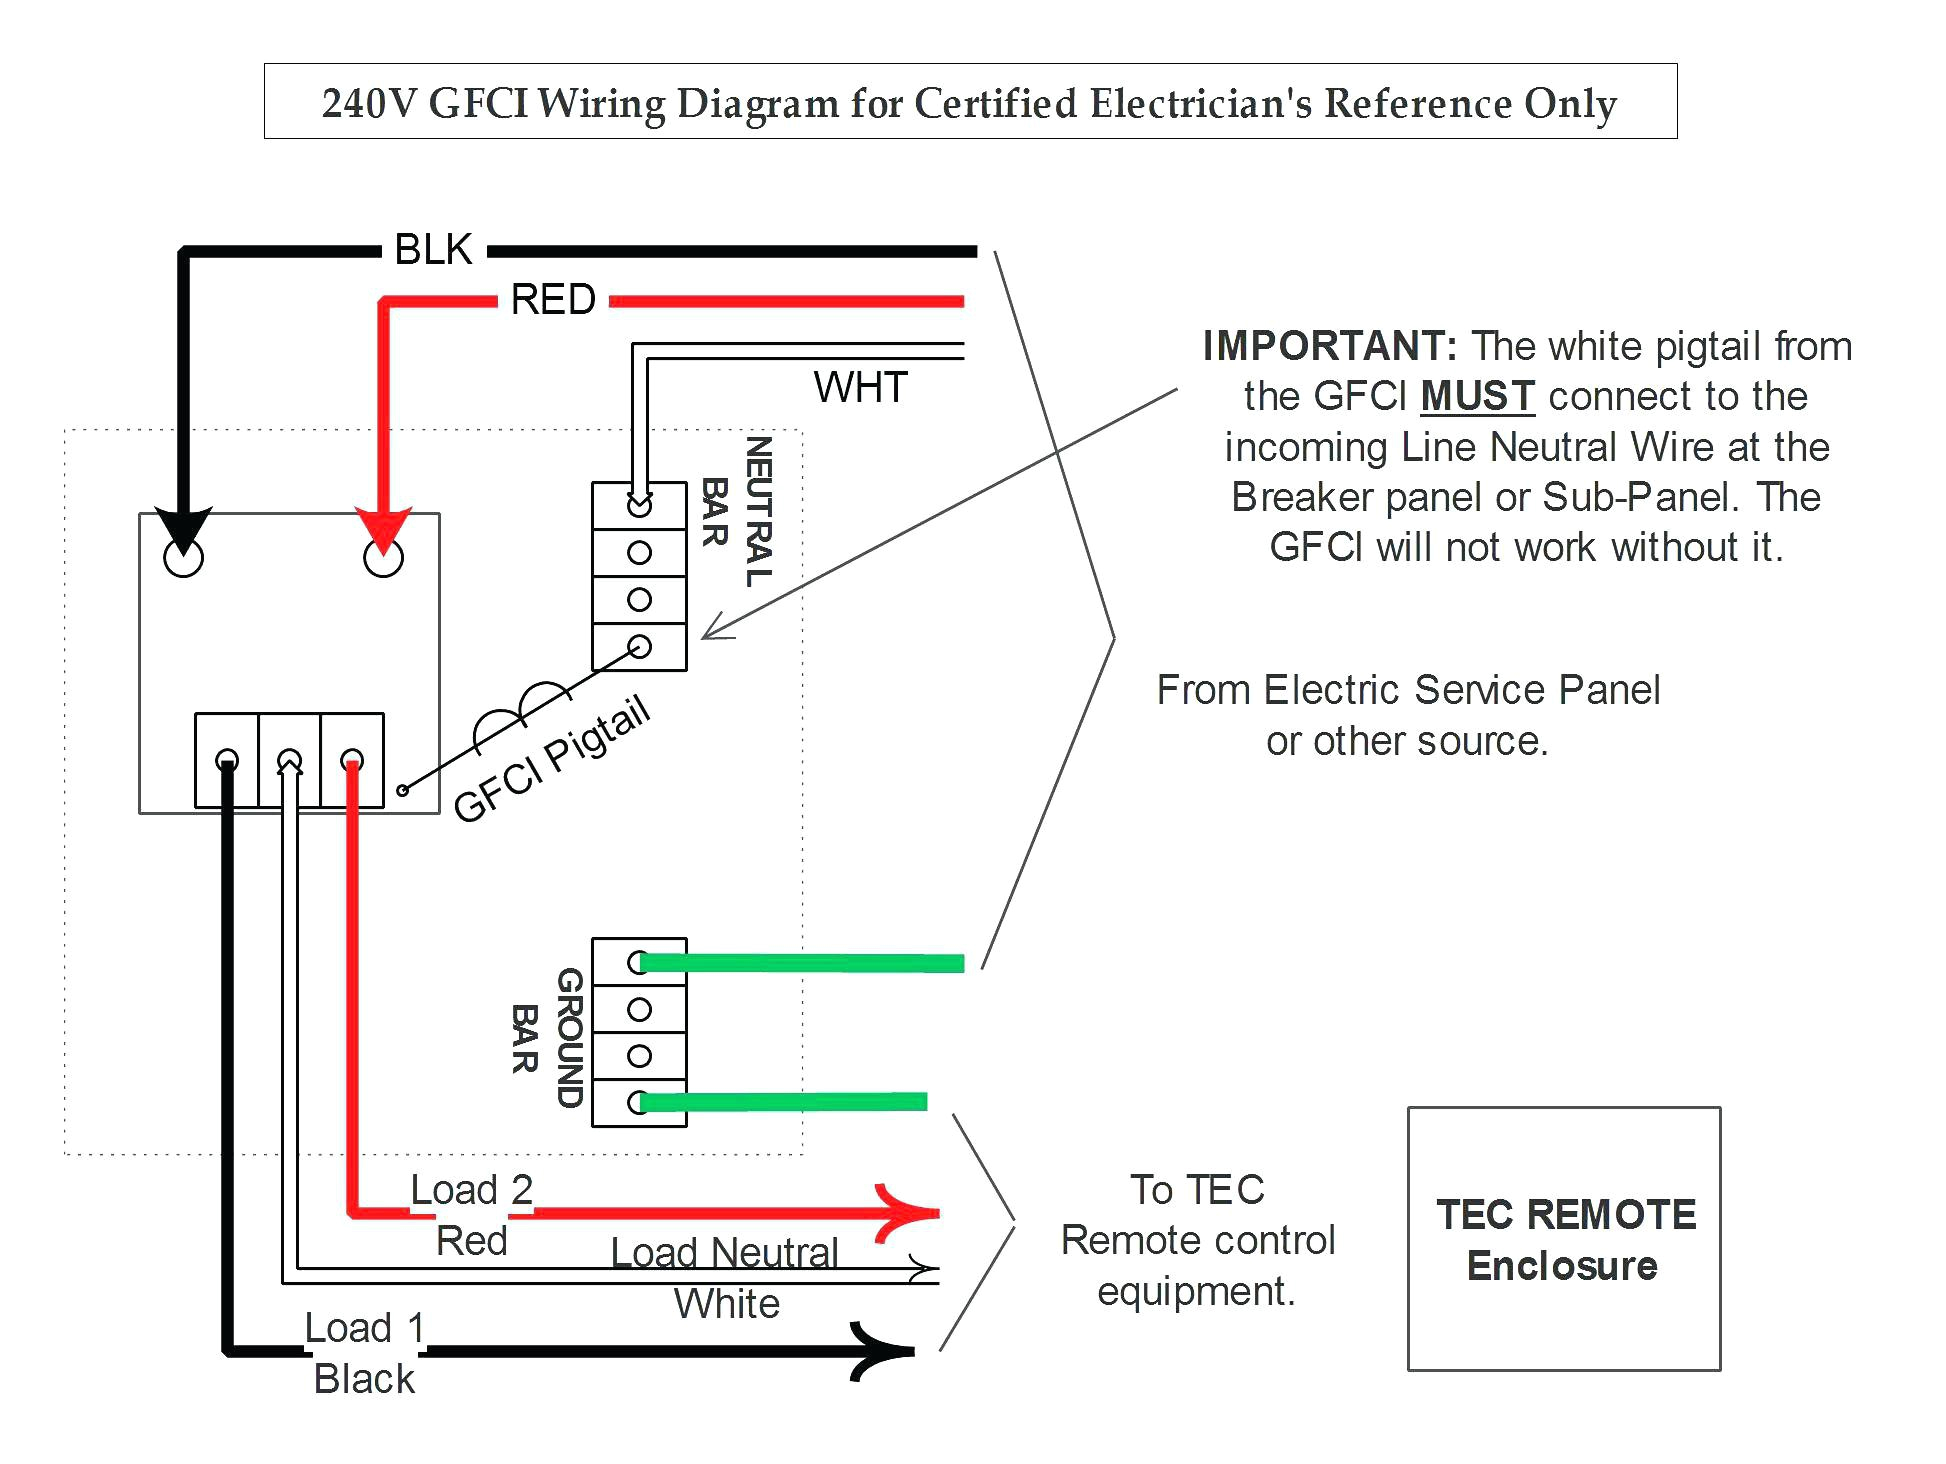 gfci wiring diagram beautiful wiring diagram amp gfci breaker panel at a box for gfi how to of gfci wiring diagram pictures